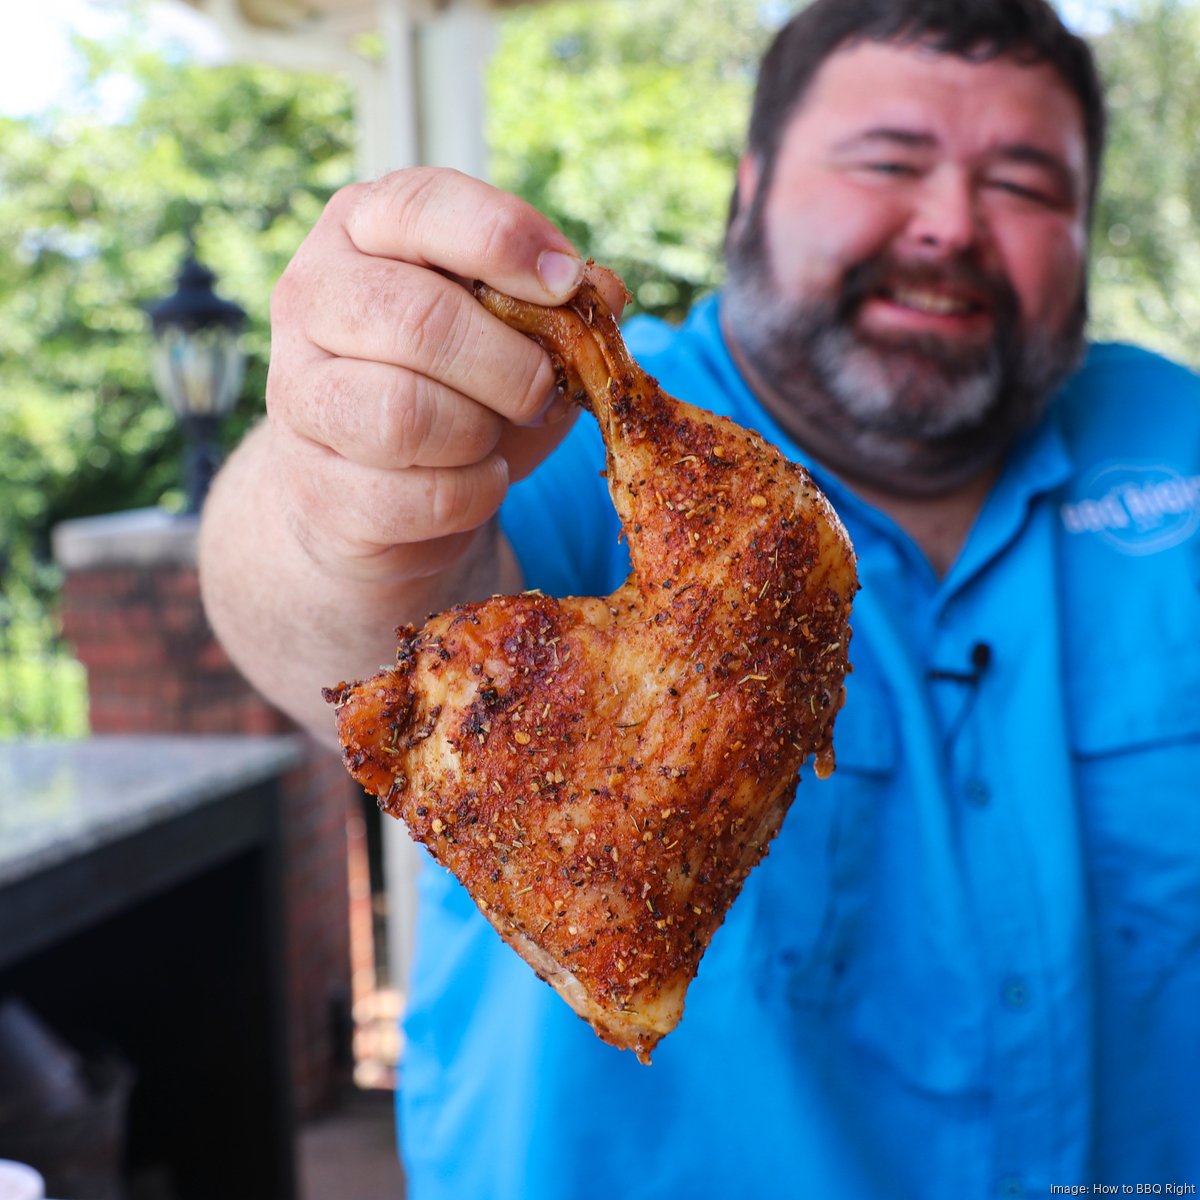 How to BBQ Right's Malcom Reed runs company from Hernando, Mississippi,  with , TikTok, newsletter content and selling seasons, rubs, sauces,  and other products. - Memphis Business Journal